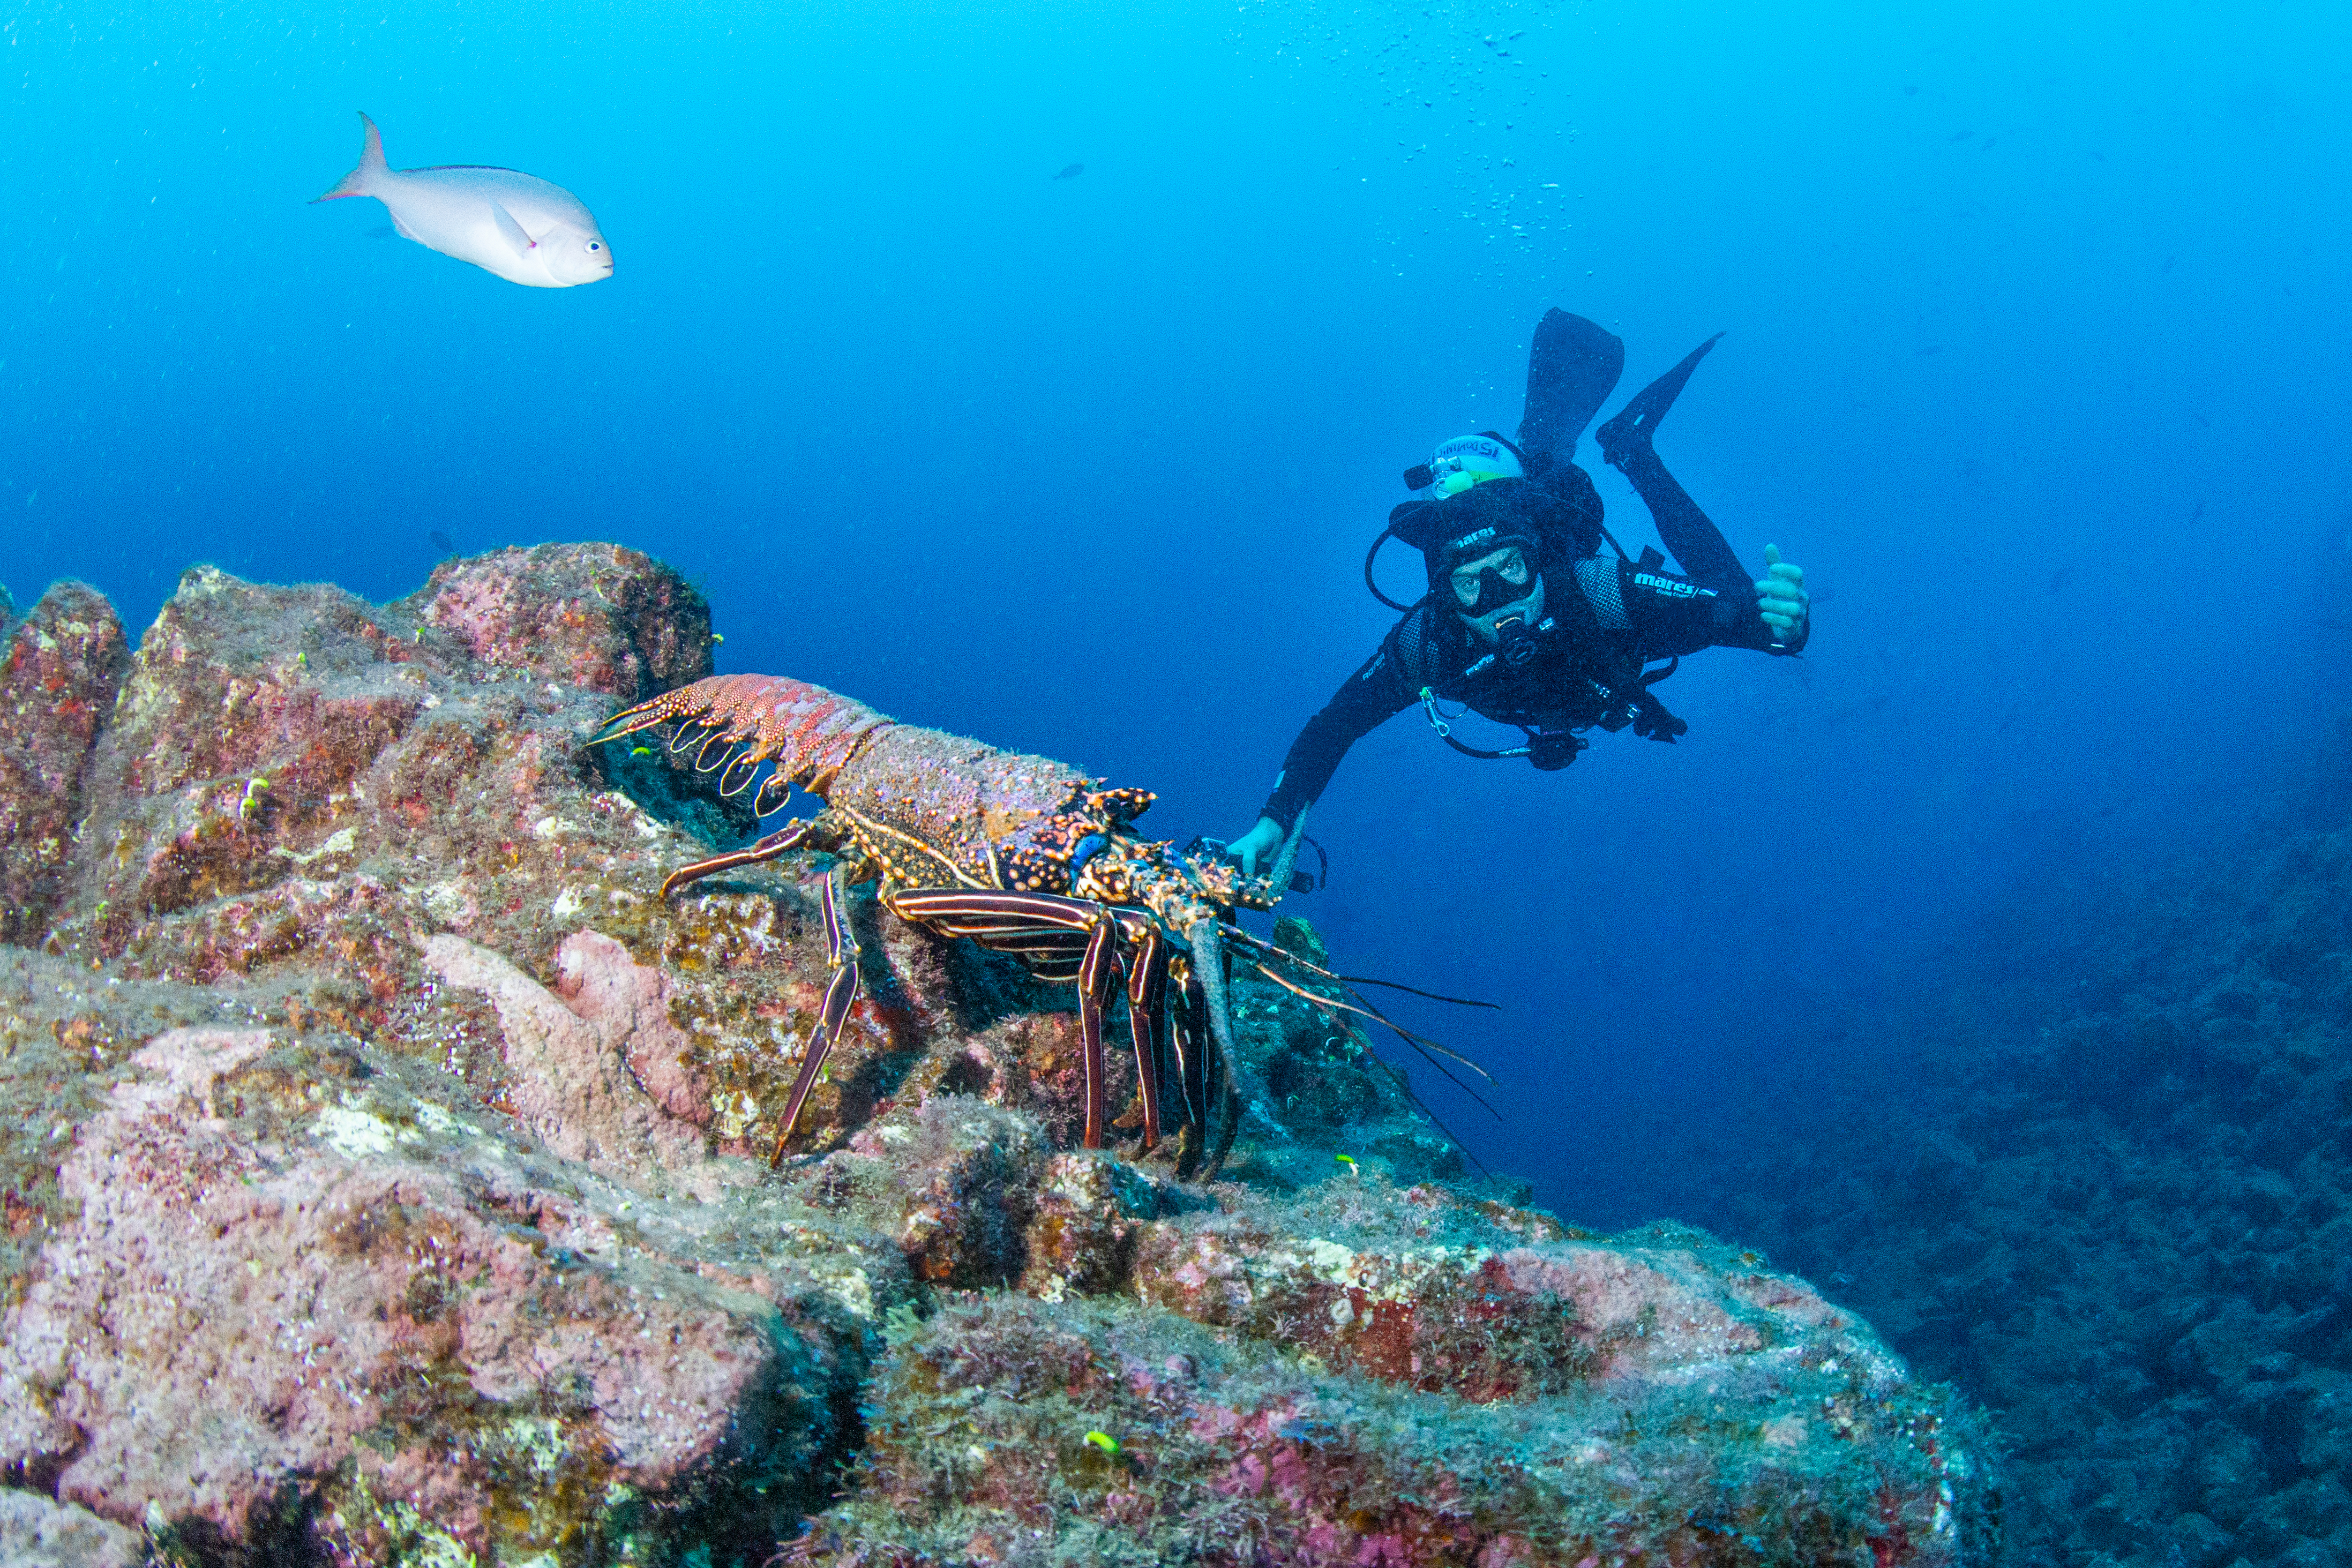 Lobster with diver, El Canyon, San Benedictor. Photo by Kate Holt